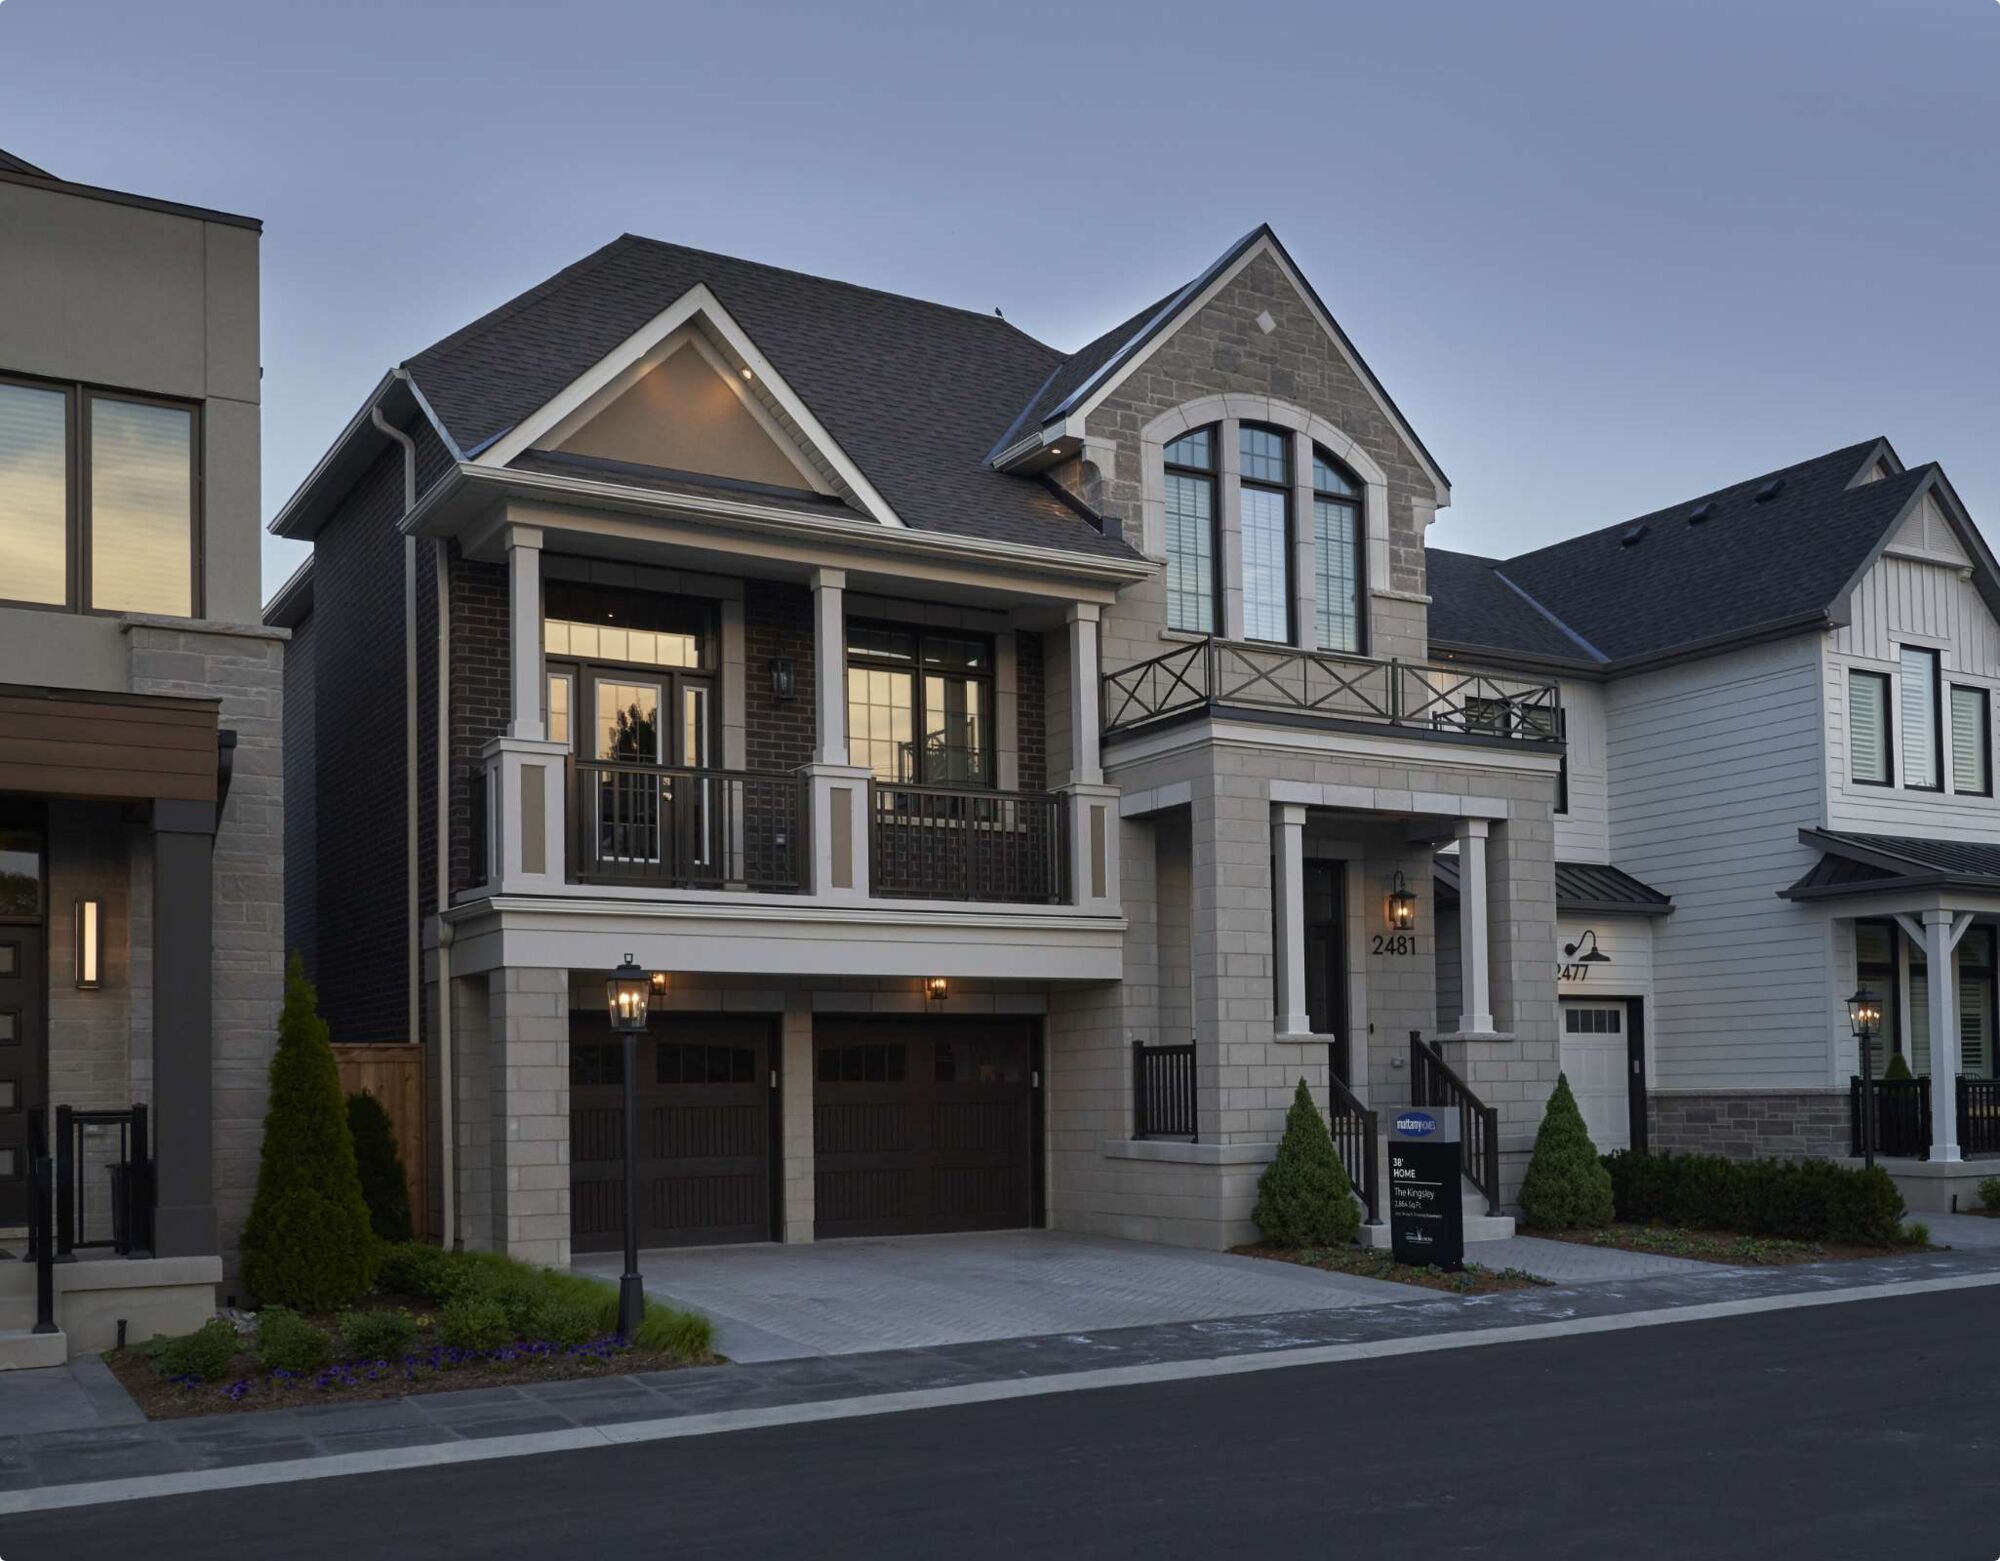 A detached, modern home with a balcony, two-car garage and stone exterior.